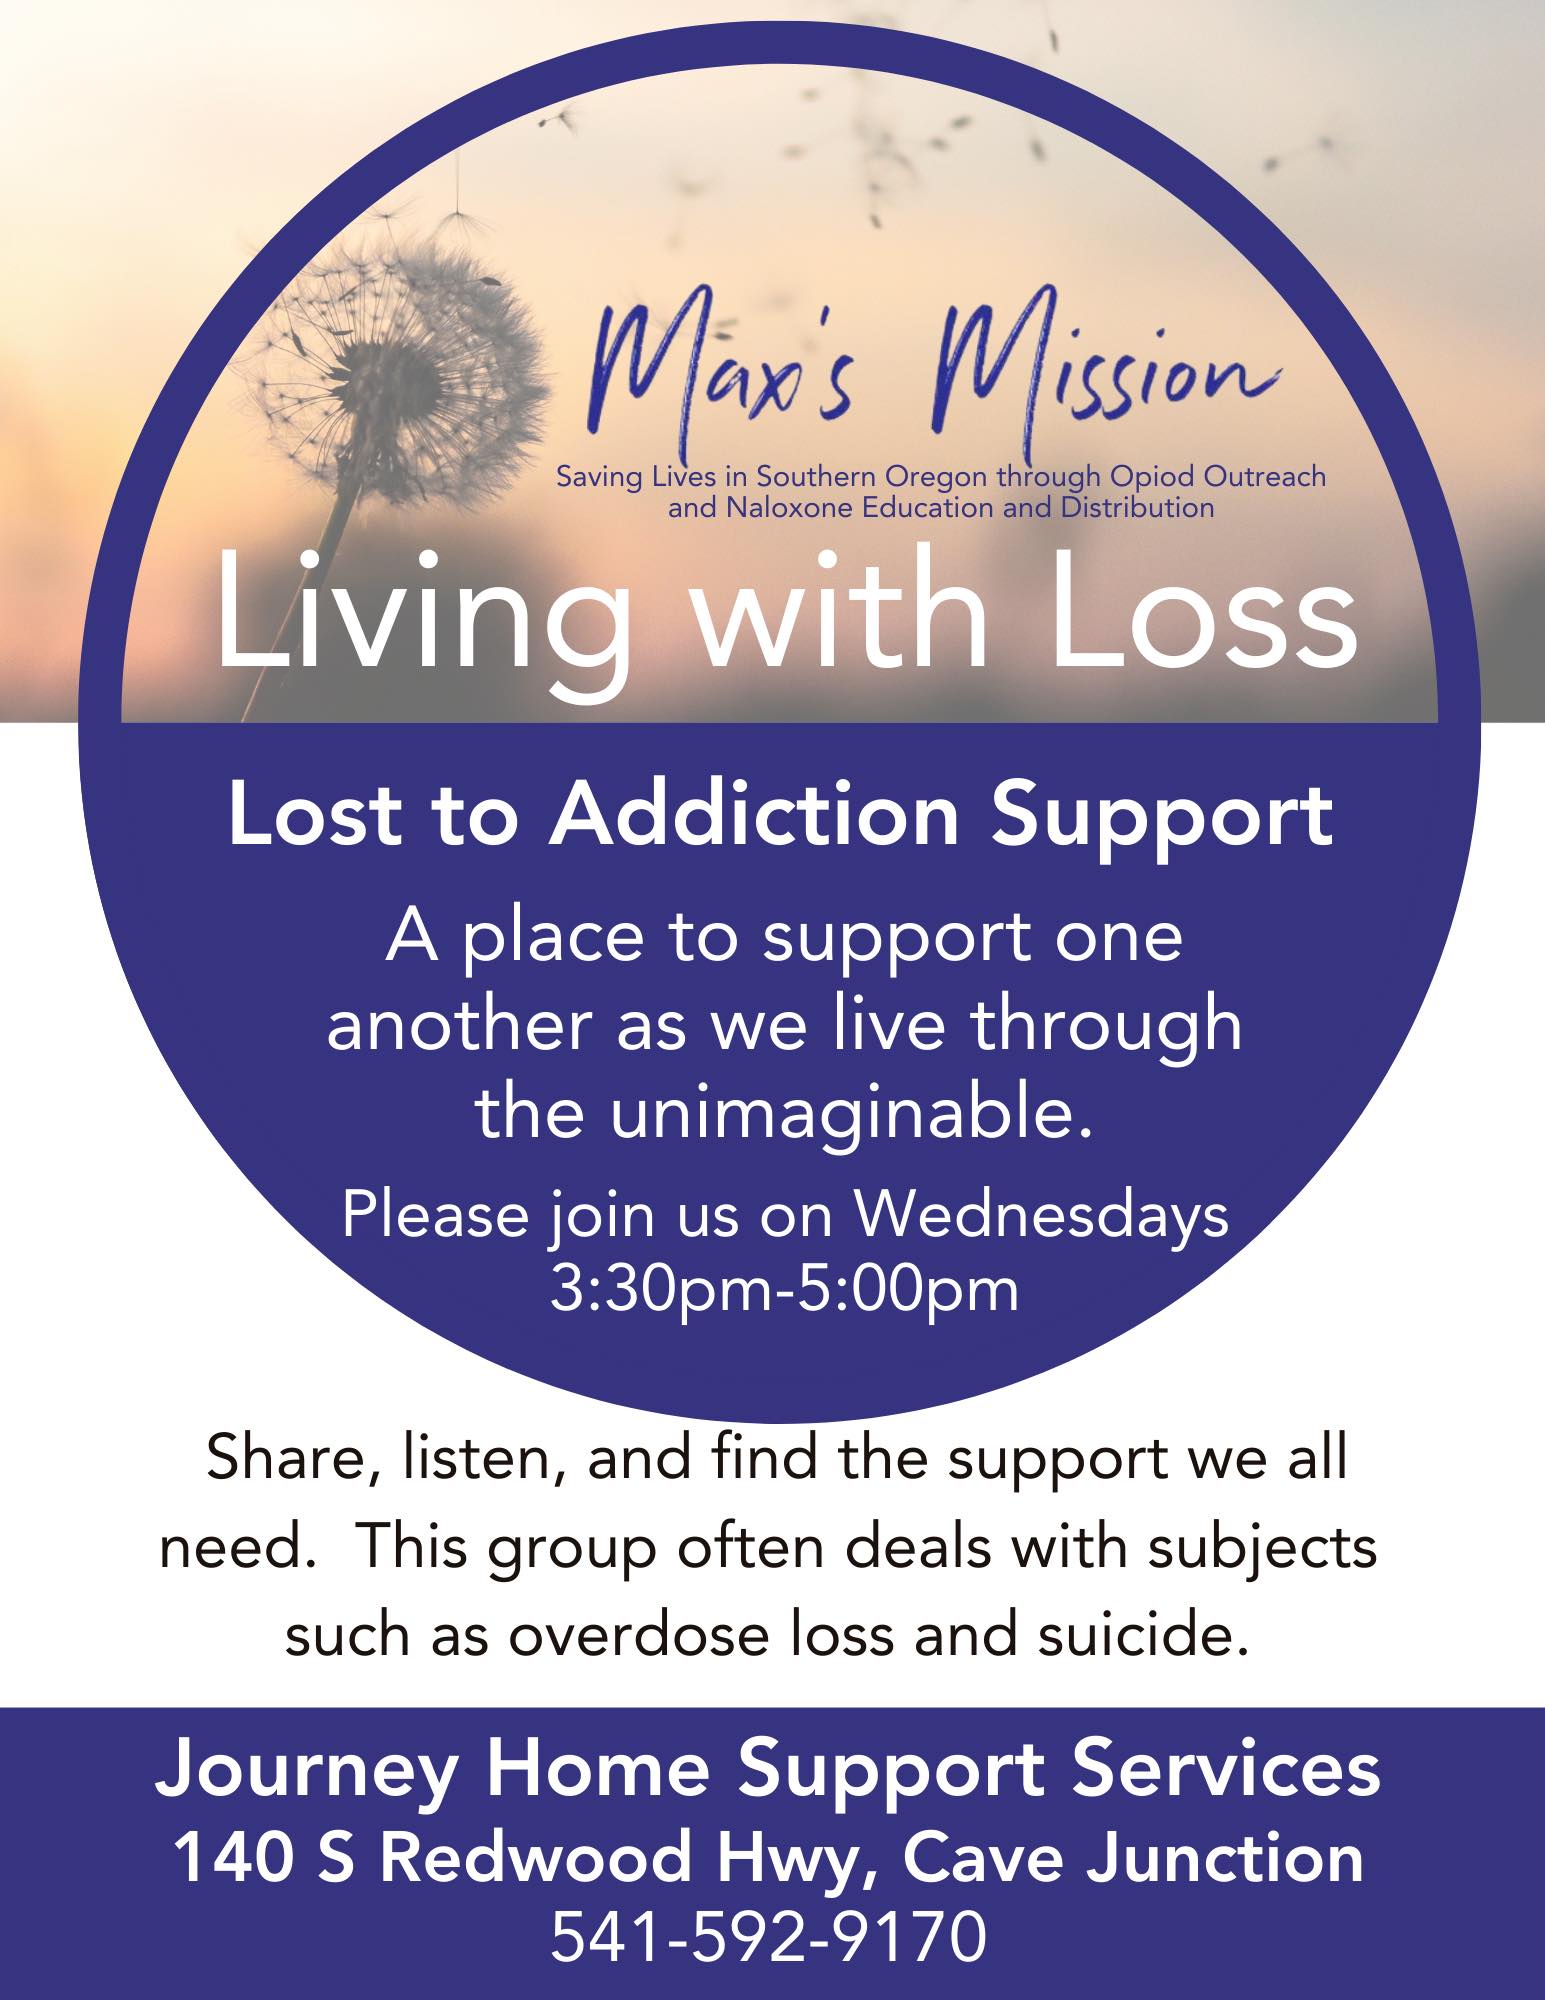 Living with Loss w/ Max's Mission